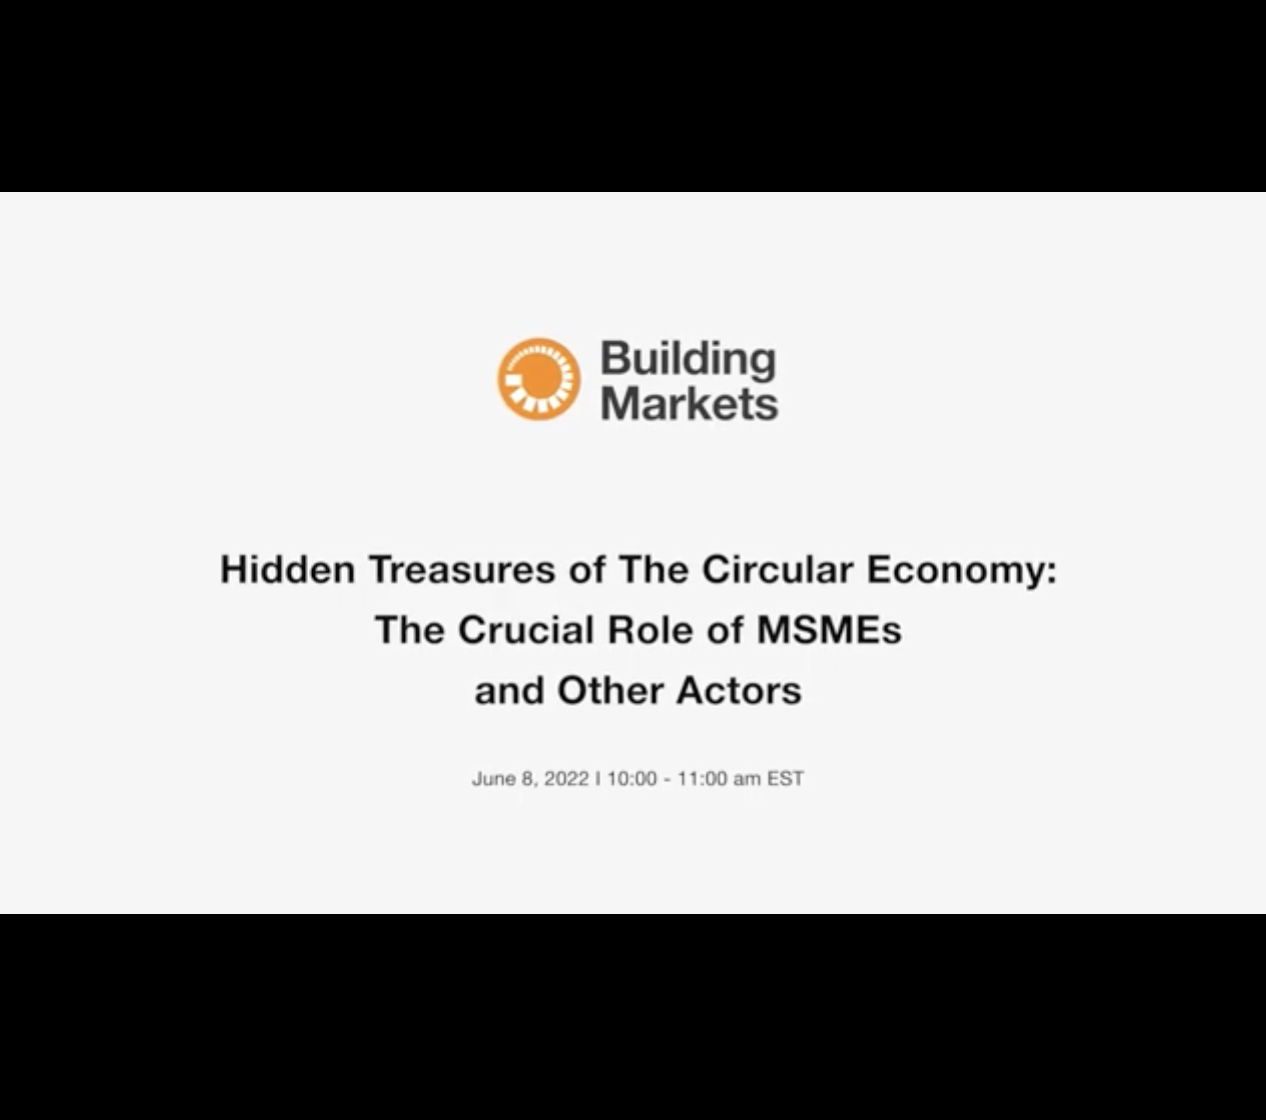 Discover the crucial role of small businesses and other upstream actors in the circular economy. 